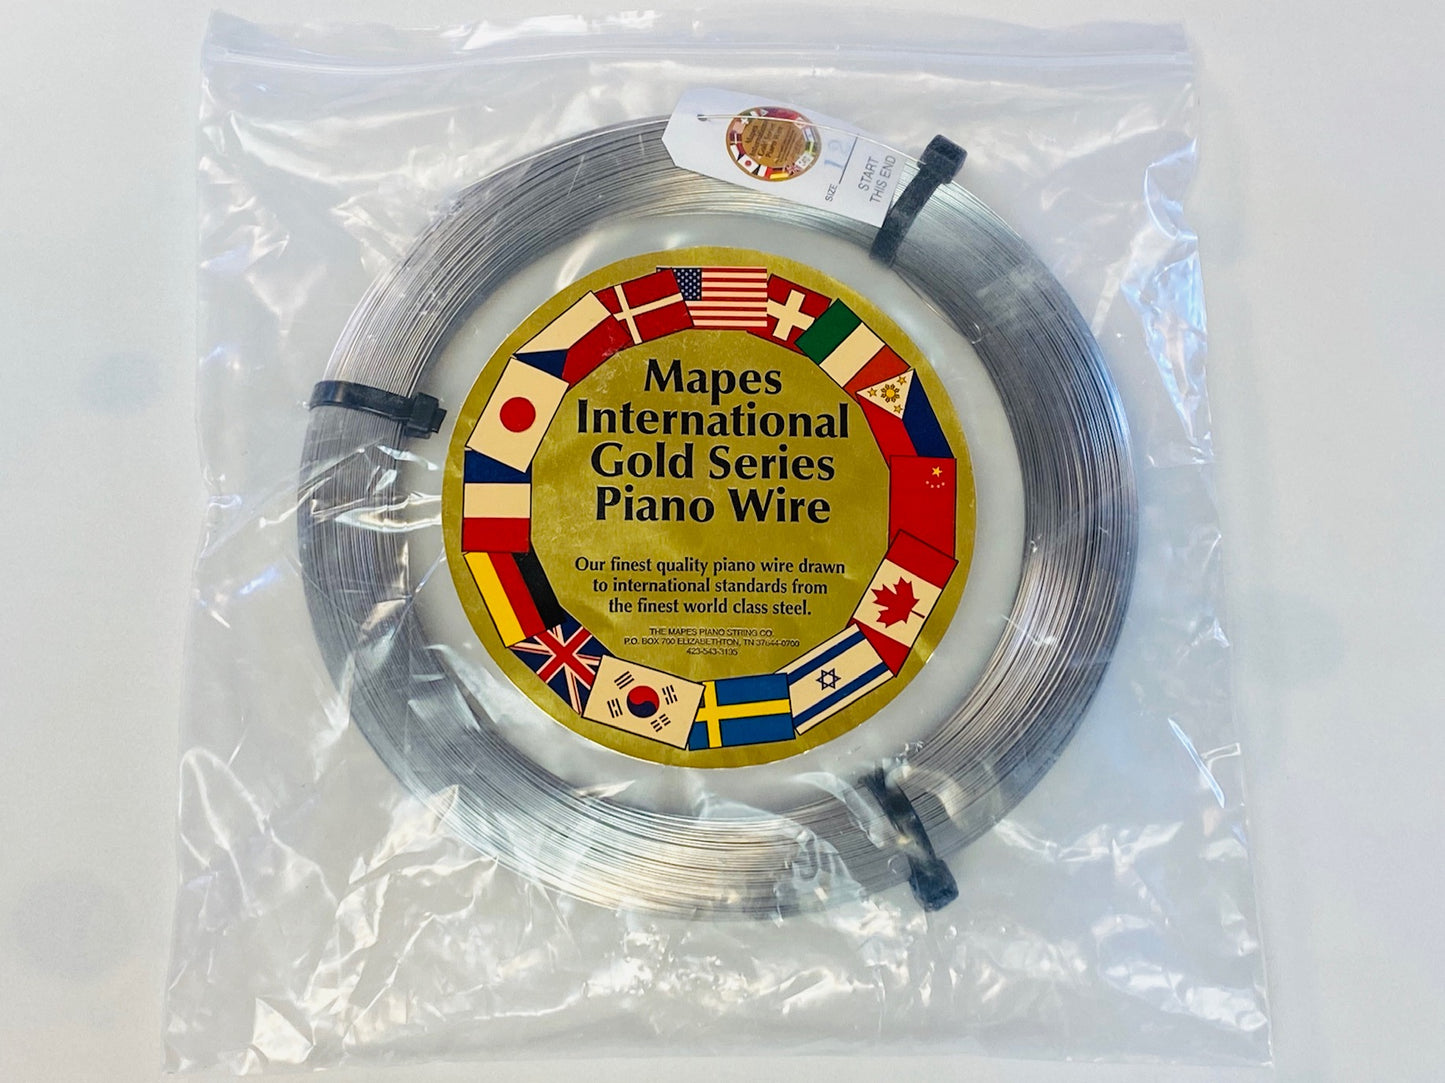 Standard Piano Wire, 5-pound coils – Mapes Strings